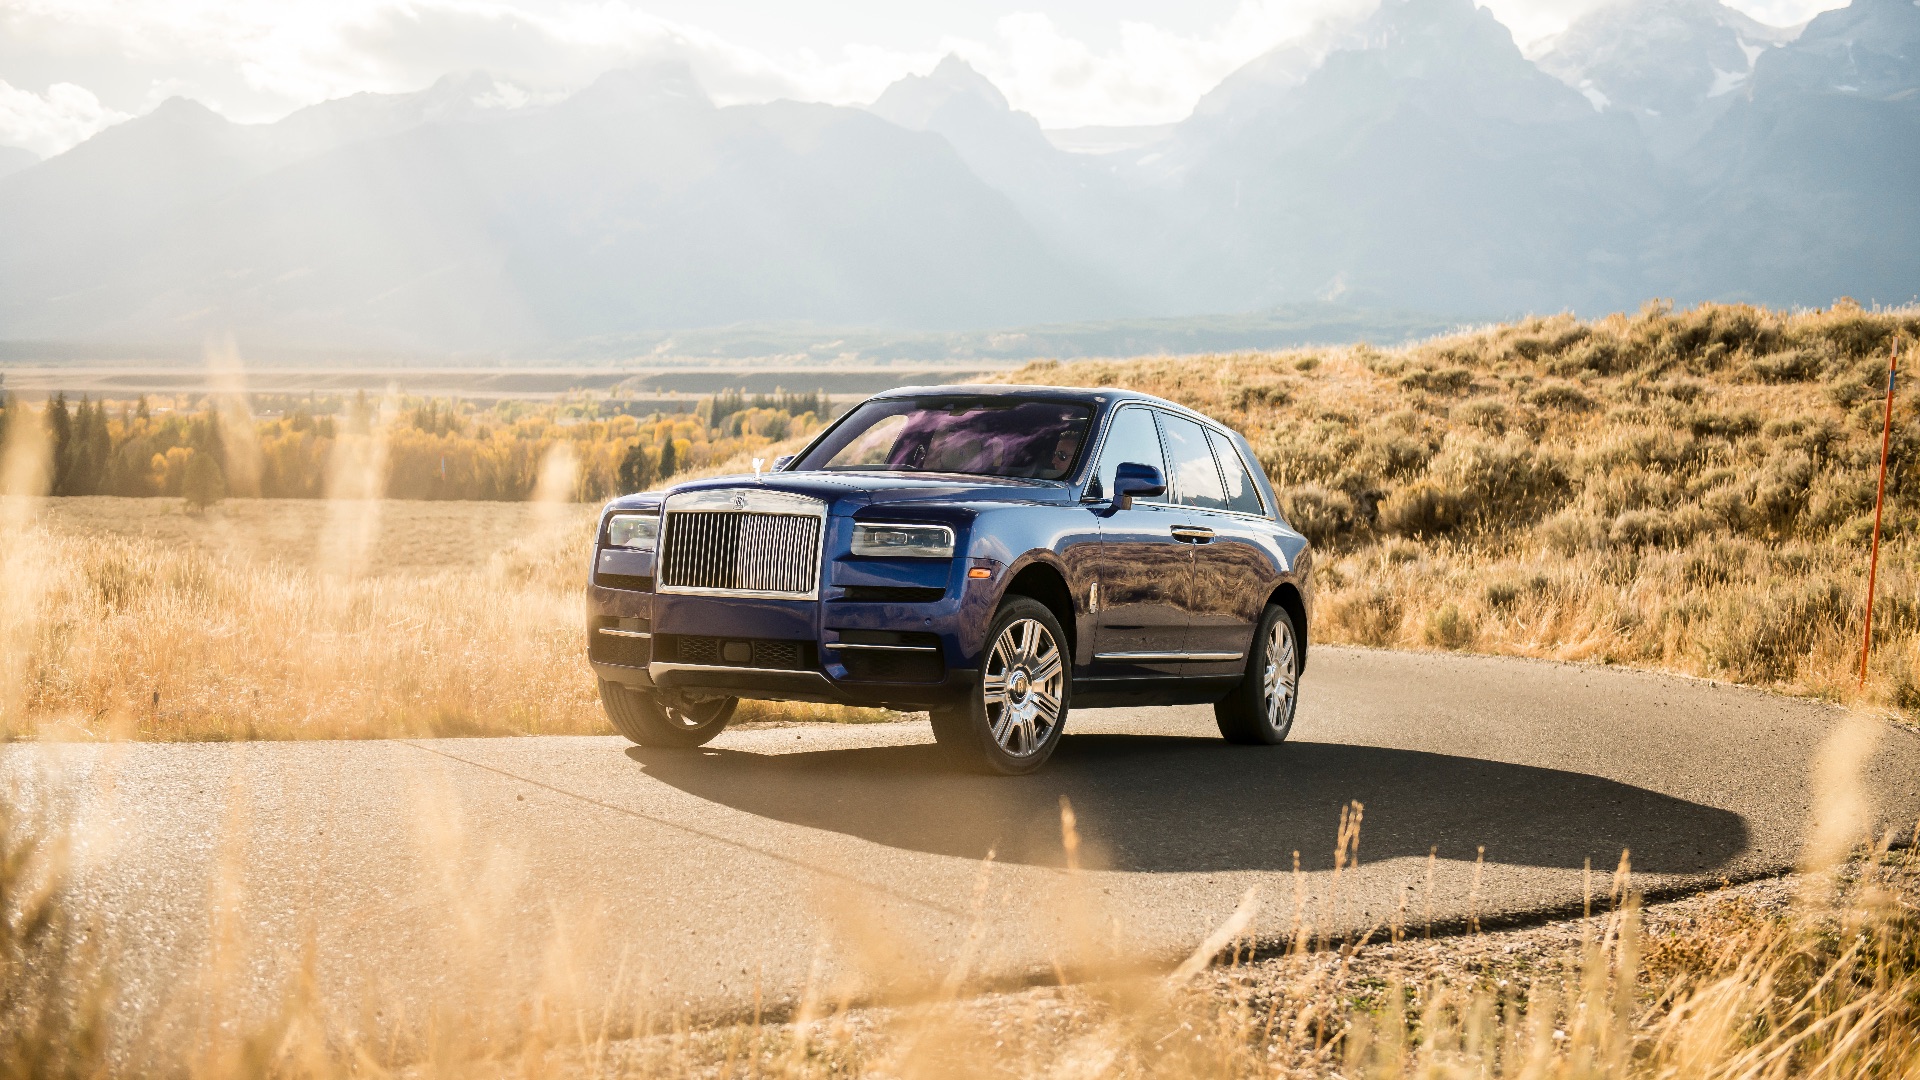 Rolls-Royce Cullinan review: what's it really like to drive?, British GQ